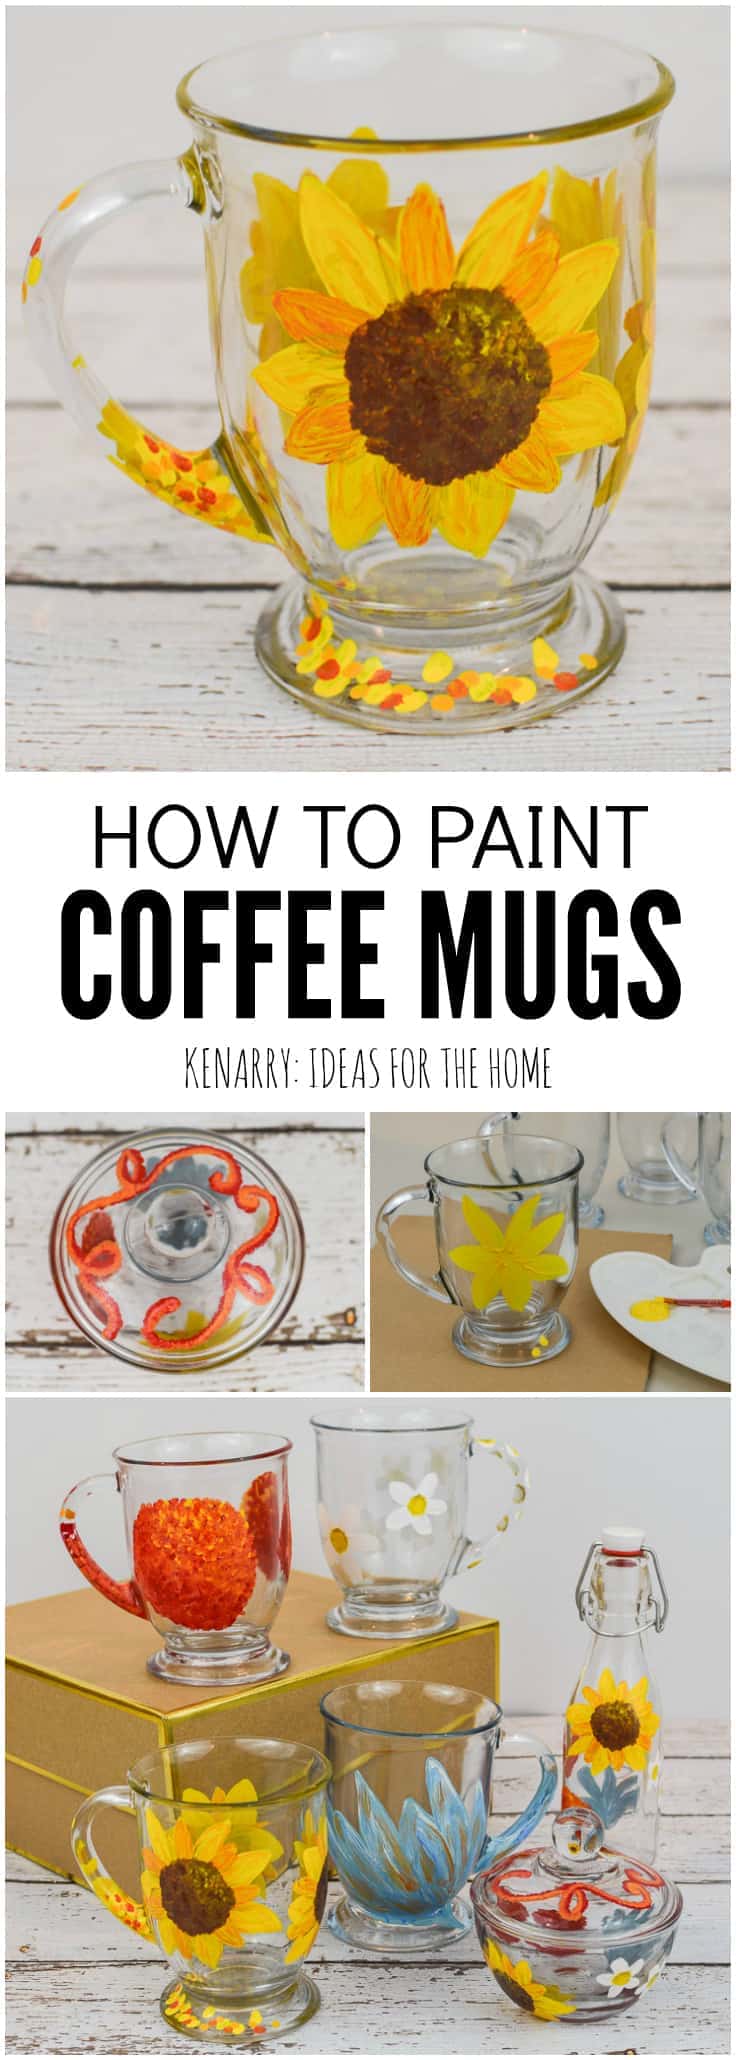 Personalized coffee cups that you hand painted yourself are great Christmas, birthday,hostess, Mother's Day and teacher appreciation gifts. Learn how to paint DIY coffee mugs in this craft tutorial.